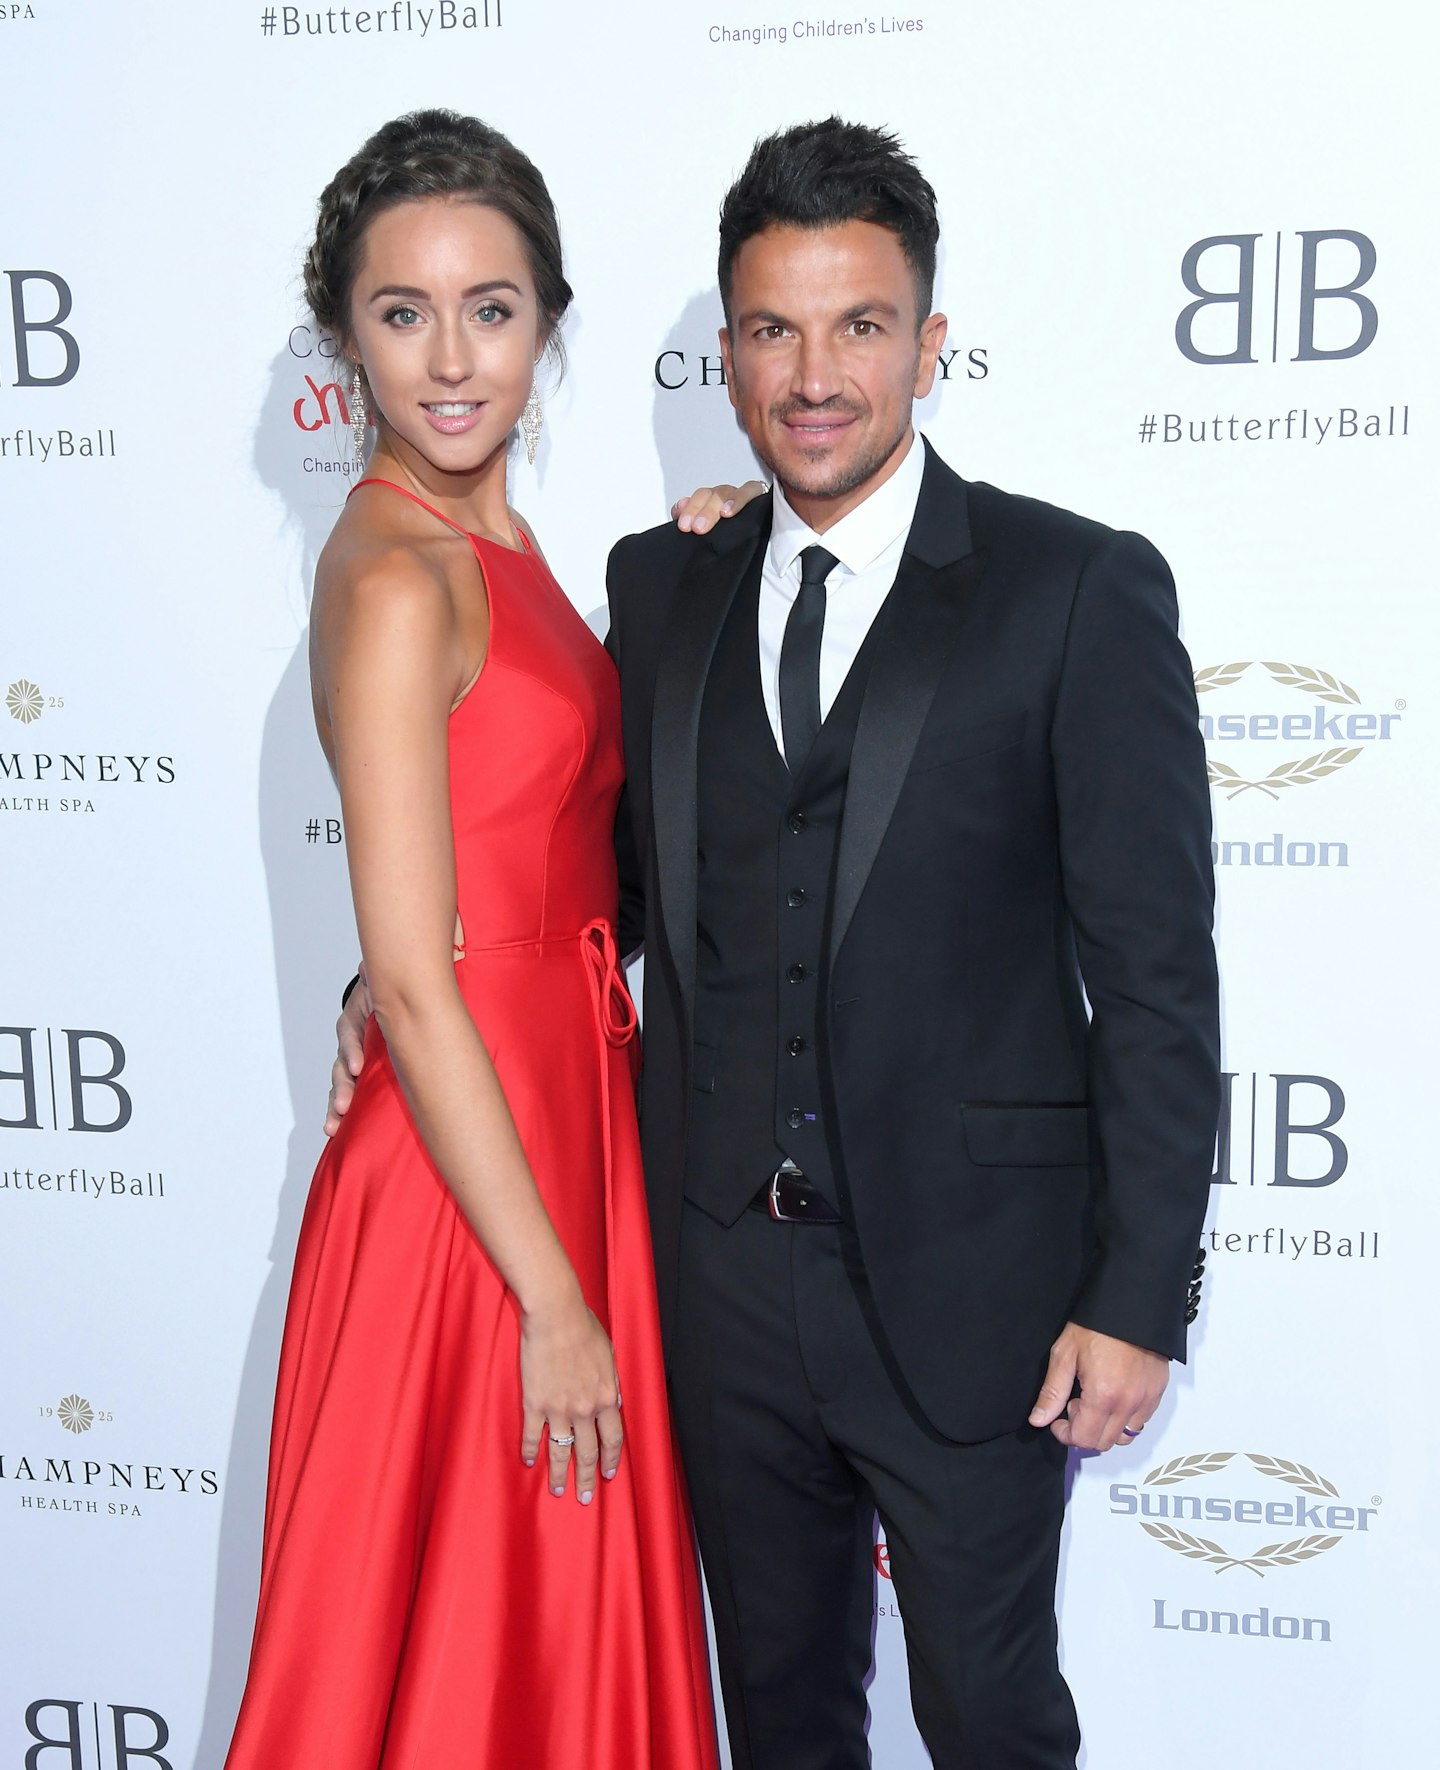 peter andre and emily macdonagh